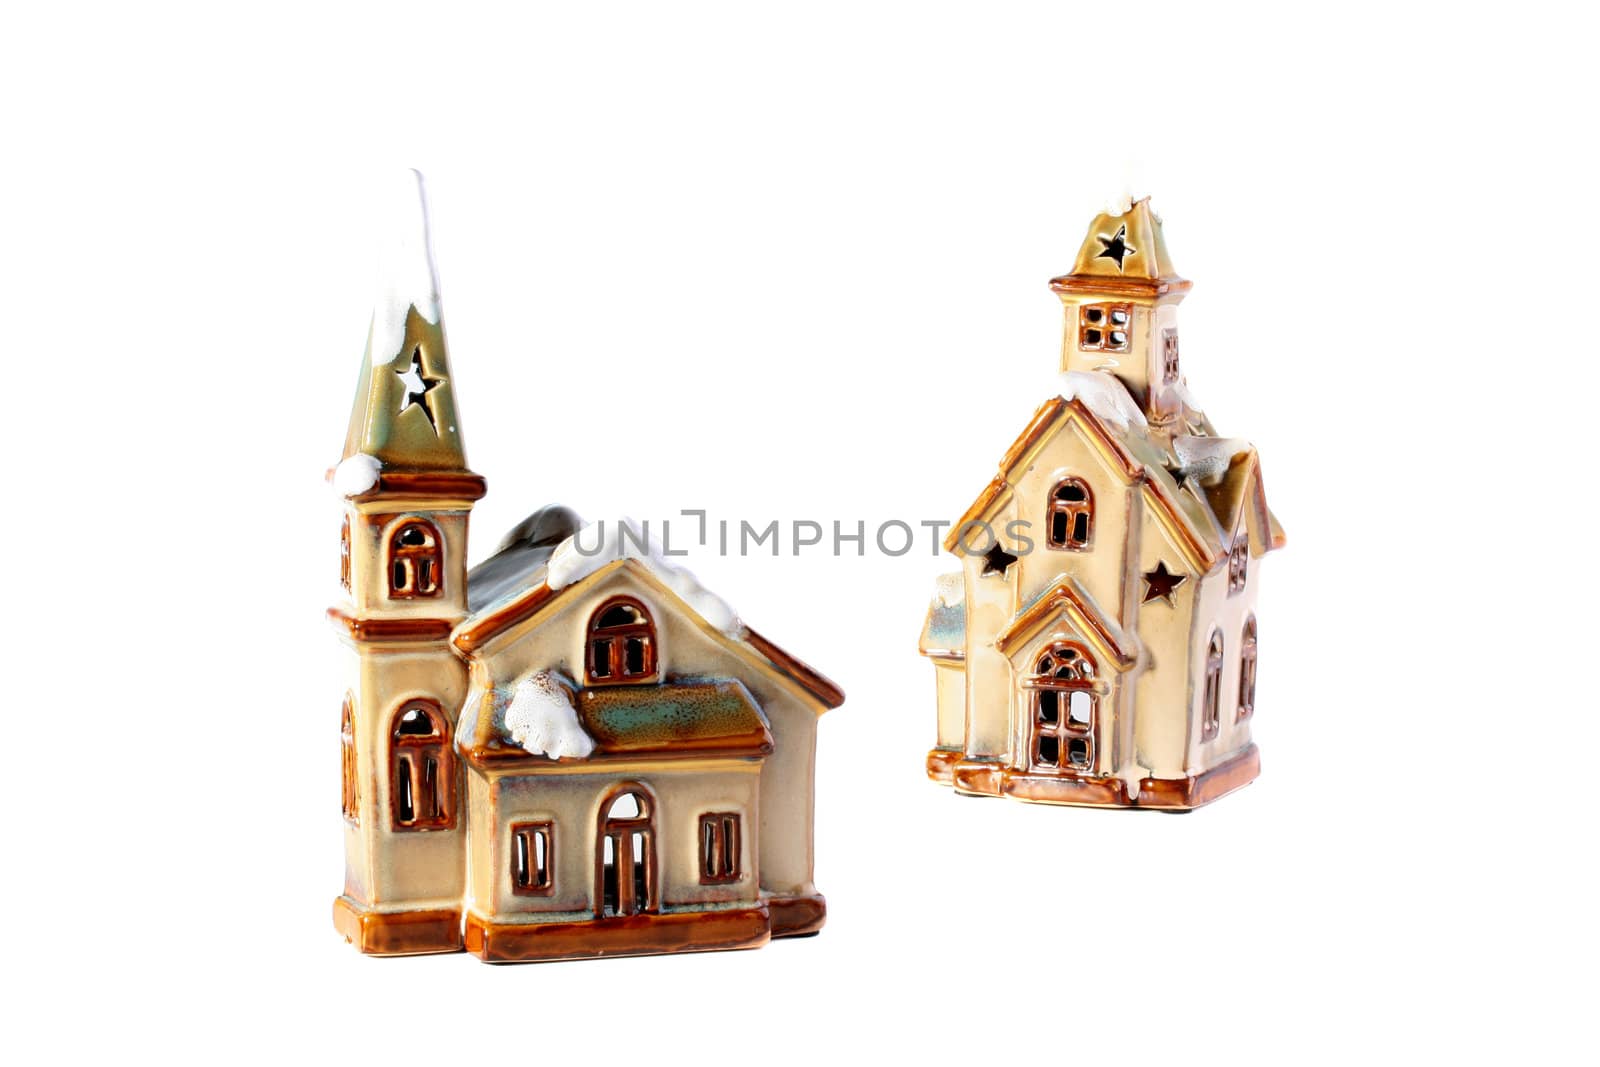 Ceramic houses for a dwelling ornament on Christmas and New Year.